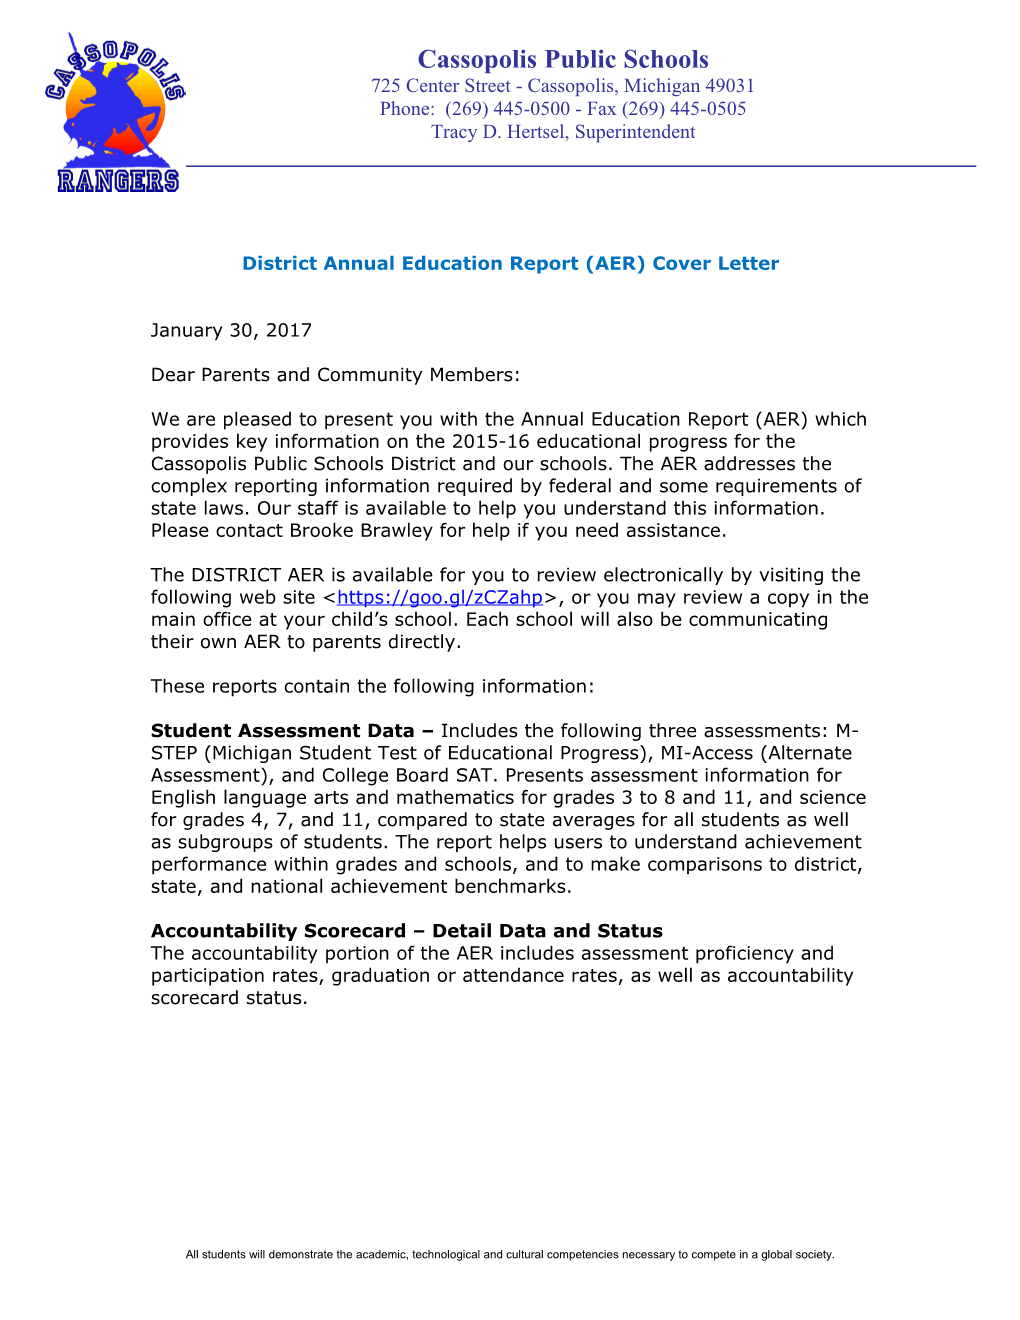 District Annual Education Report (AER) Cover Letter